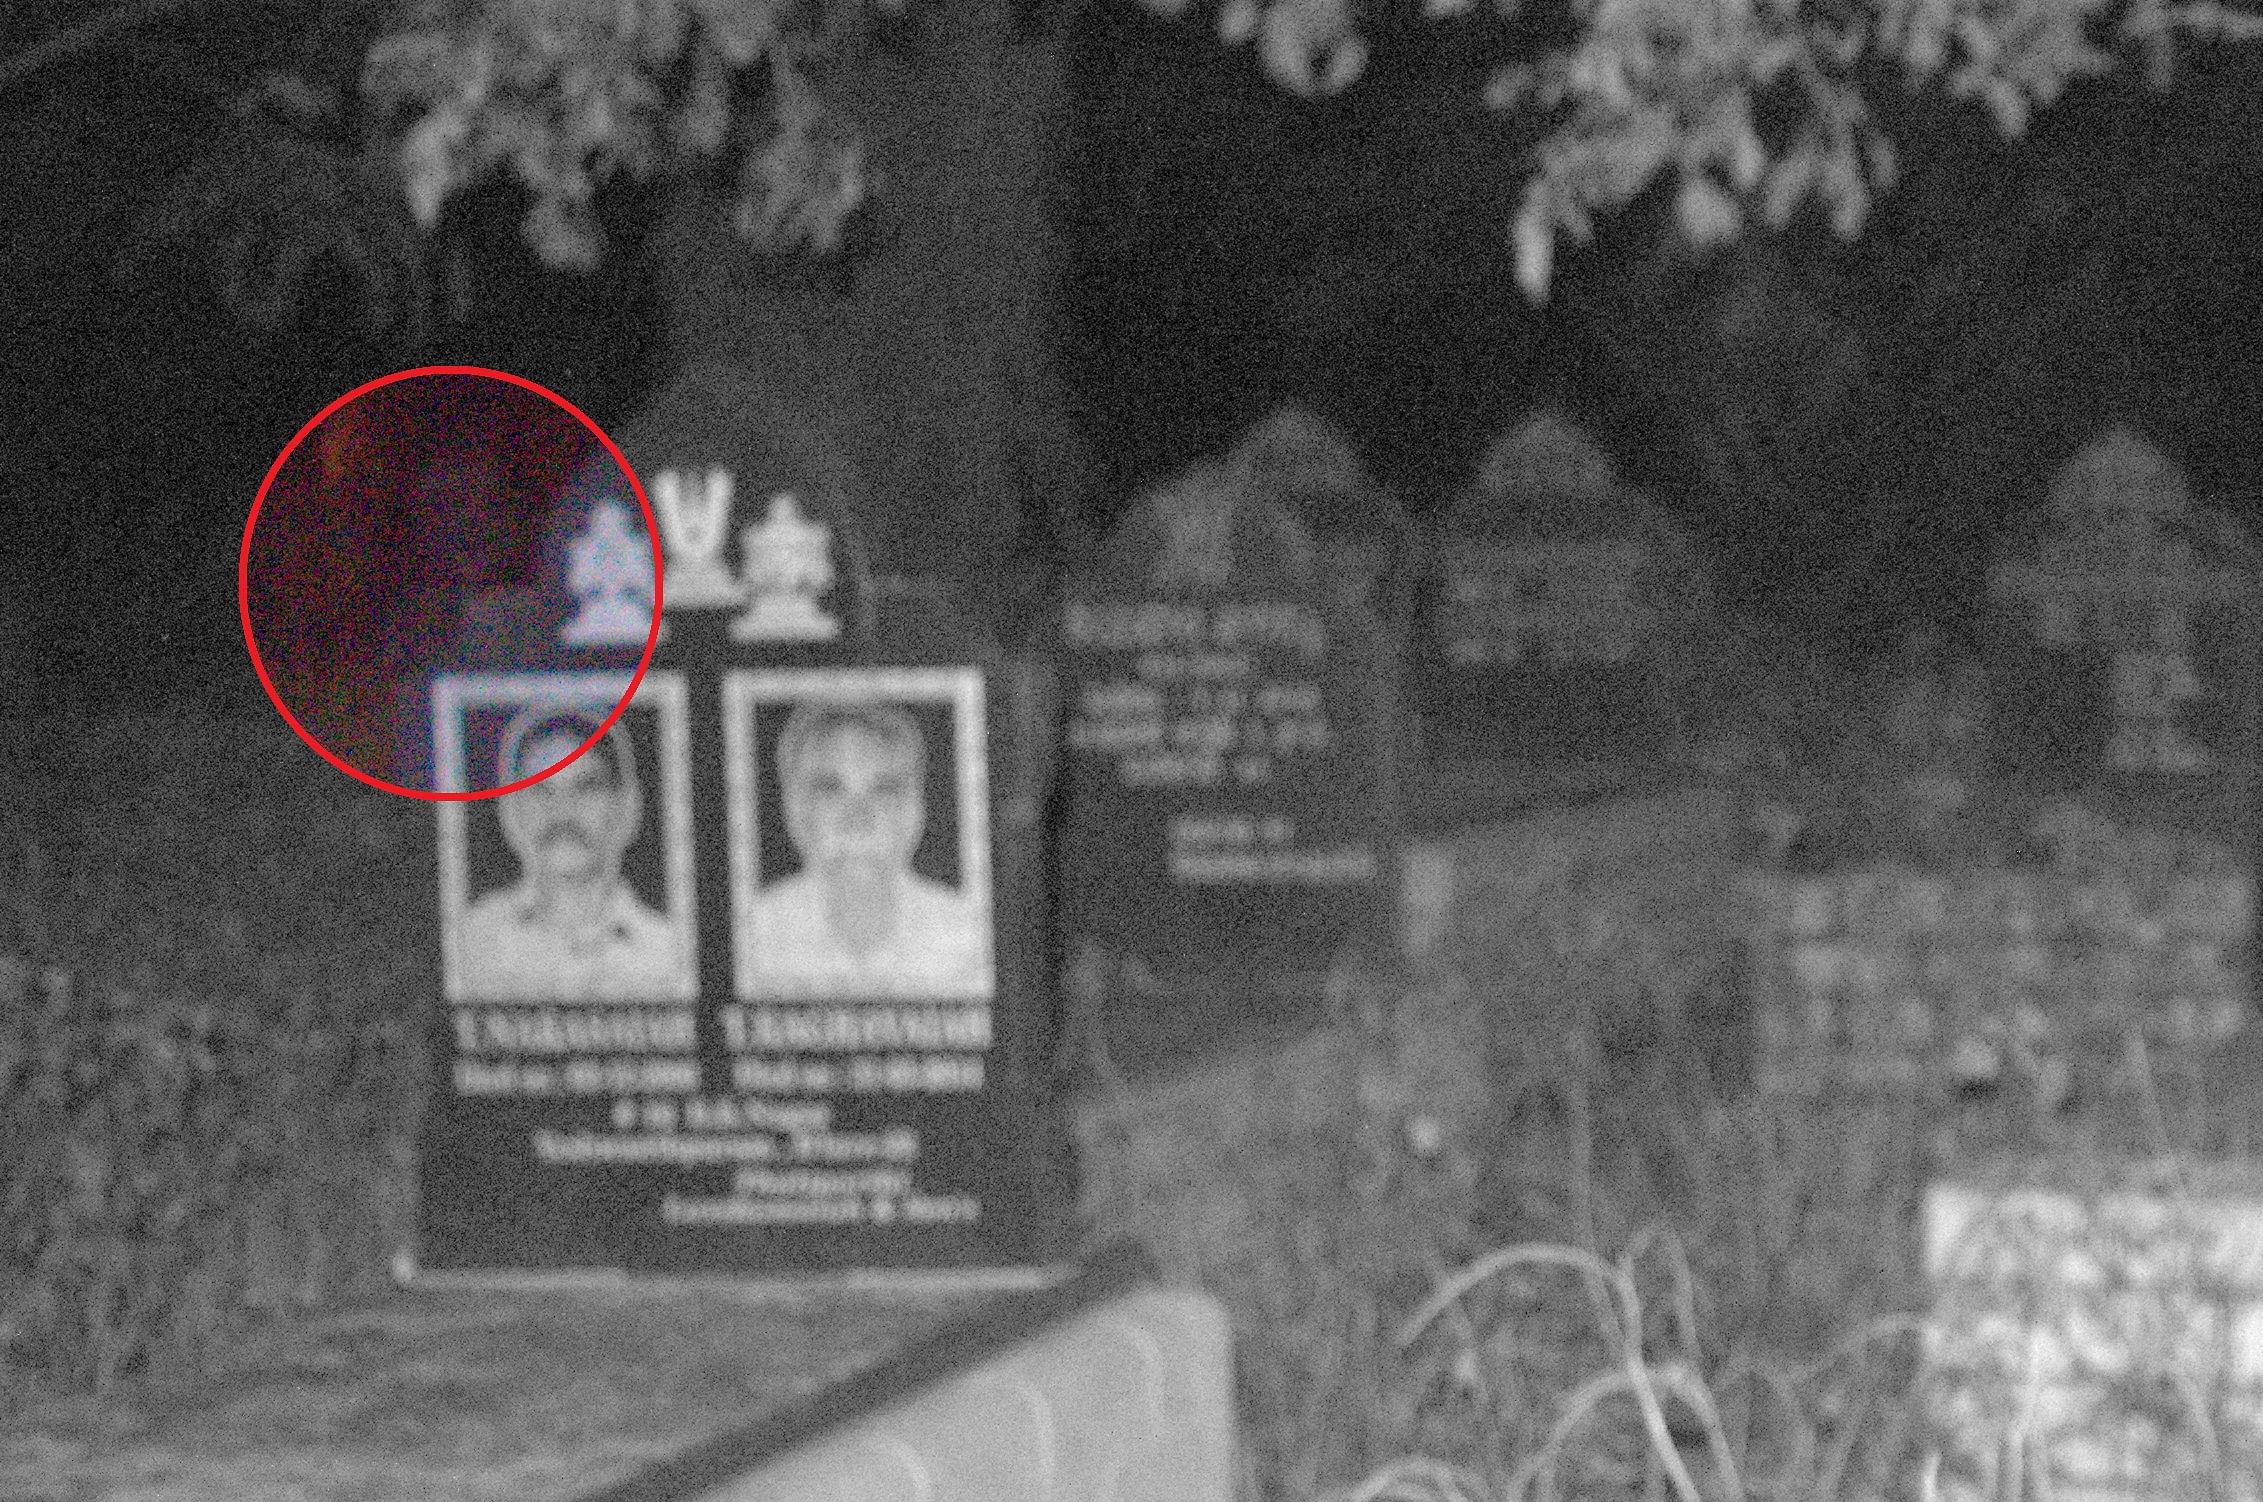 The group claims it captured an image of a spirit at the Kalpalli cemetery in Bengaluru.